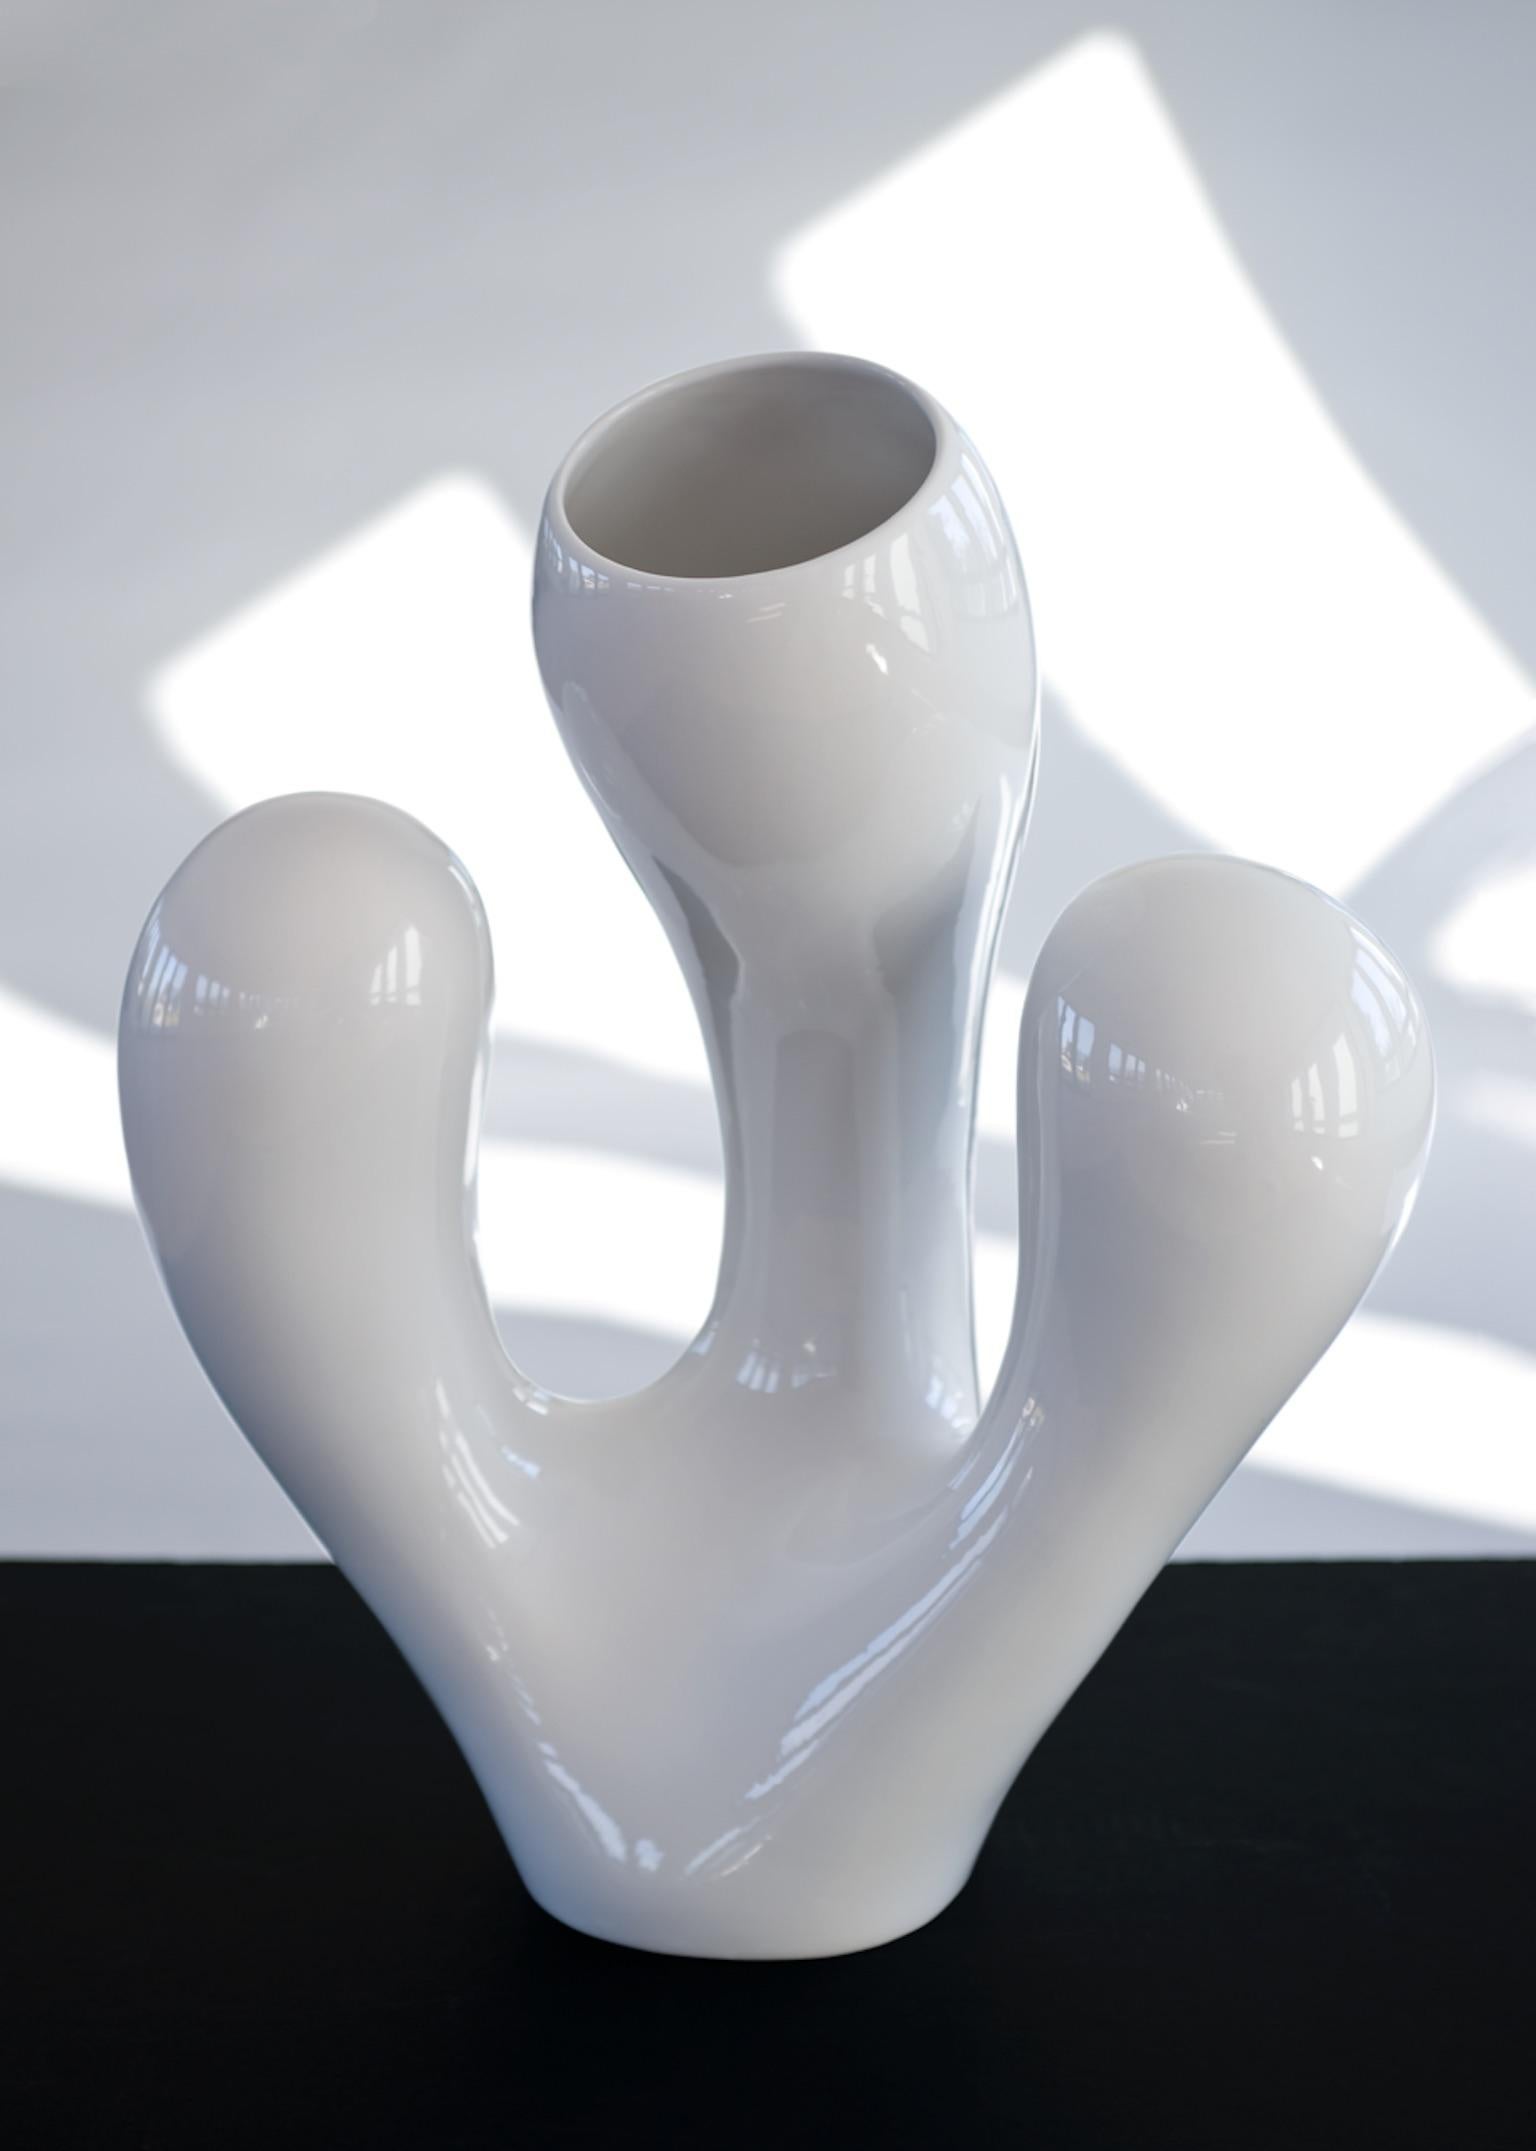 Ceramic vase model 07 of the Naturellement collection, designed by Emmanuel Babled and produced by Superego Editions in 2008. Limited edition of 33 pieces. Signed and numbered.

Biography:
Superego editions was born in 2006, performing a constant